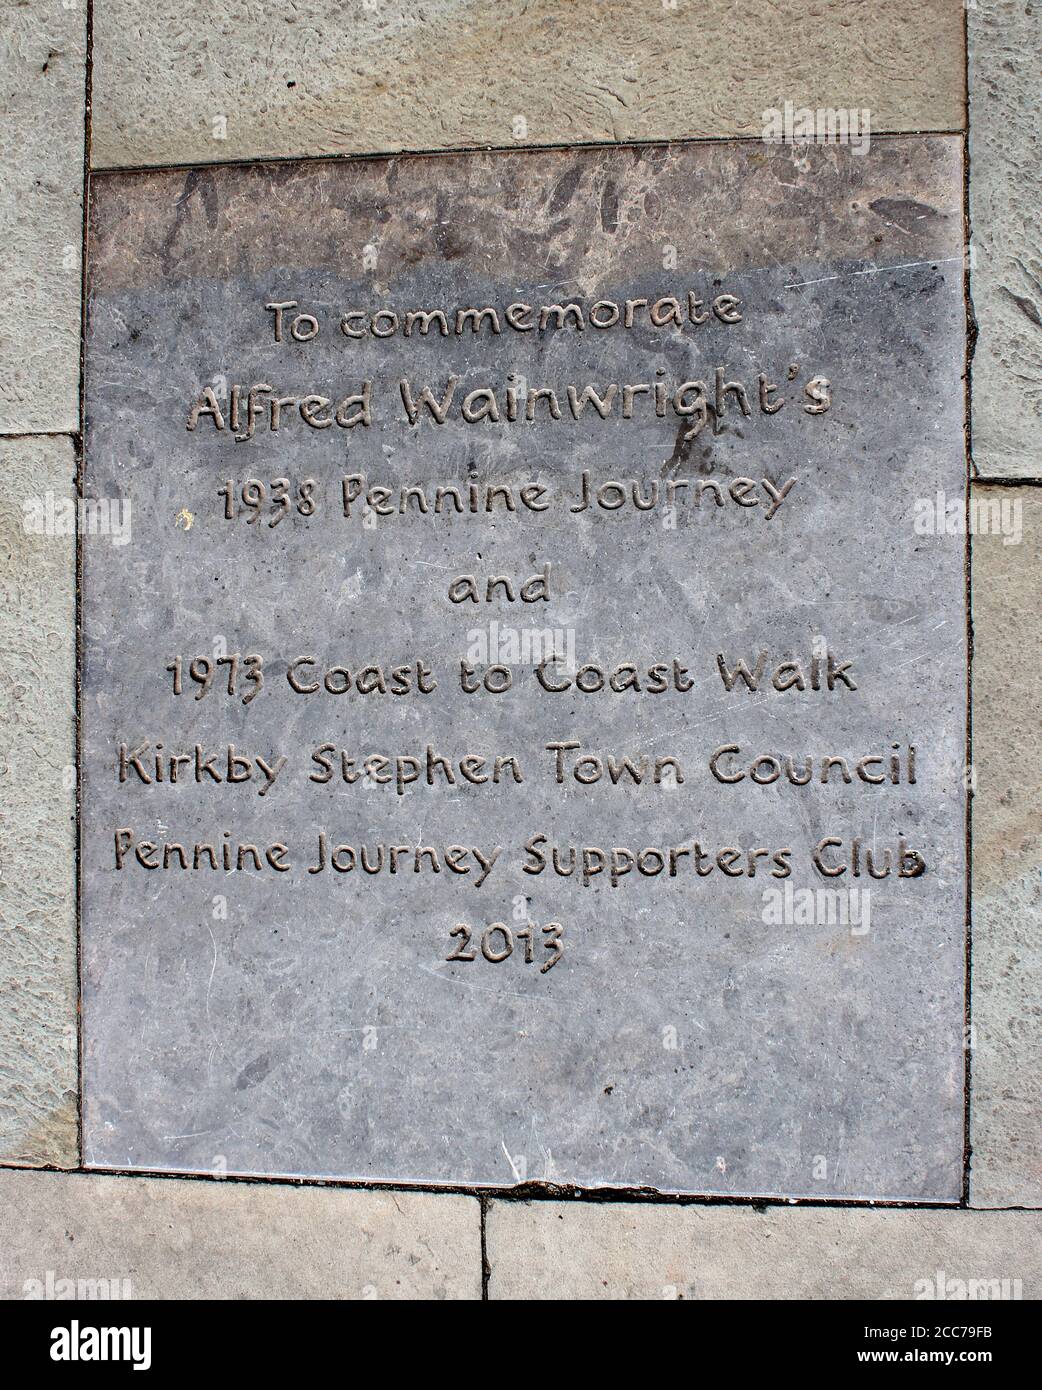 Commemorative engraving paving stone in pavement footpath outside the cloisters, Kirkby Stephen, Cumbria commemorating Alfred Wainwright's walks. Stock Photo